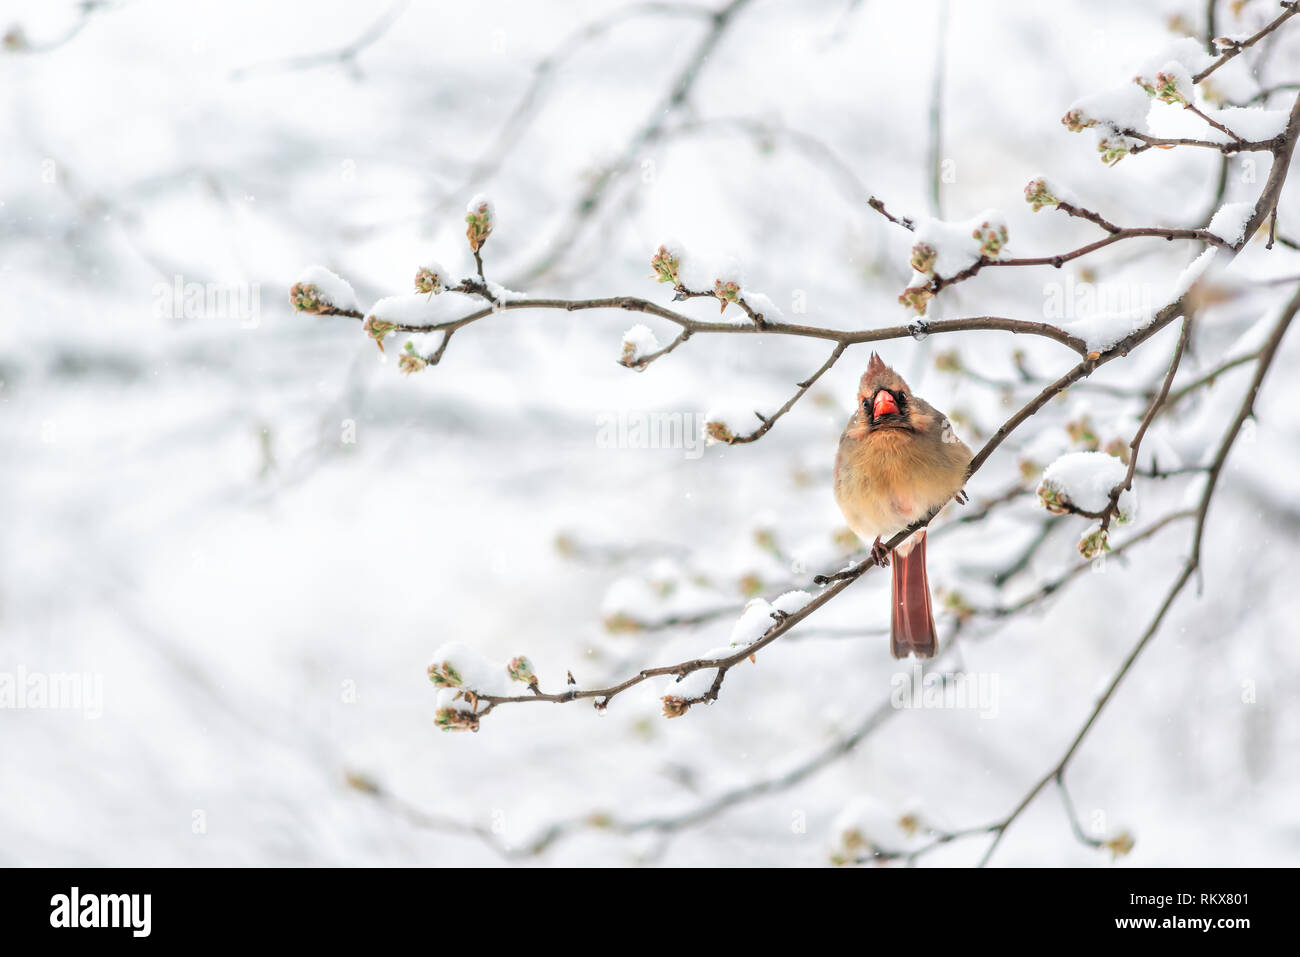 Puffed up female red northern cardinal Cardinalis bird sitting perched on tree branch during winter in Virginia snow flakes falling Stock Photo